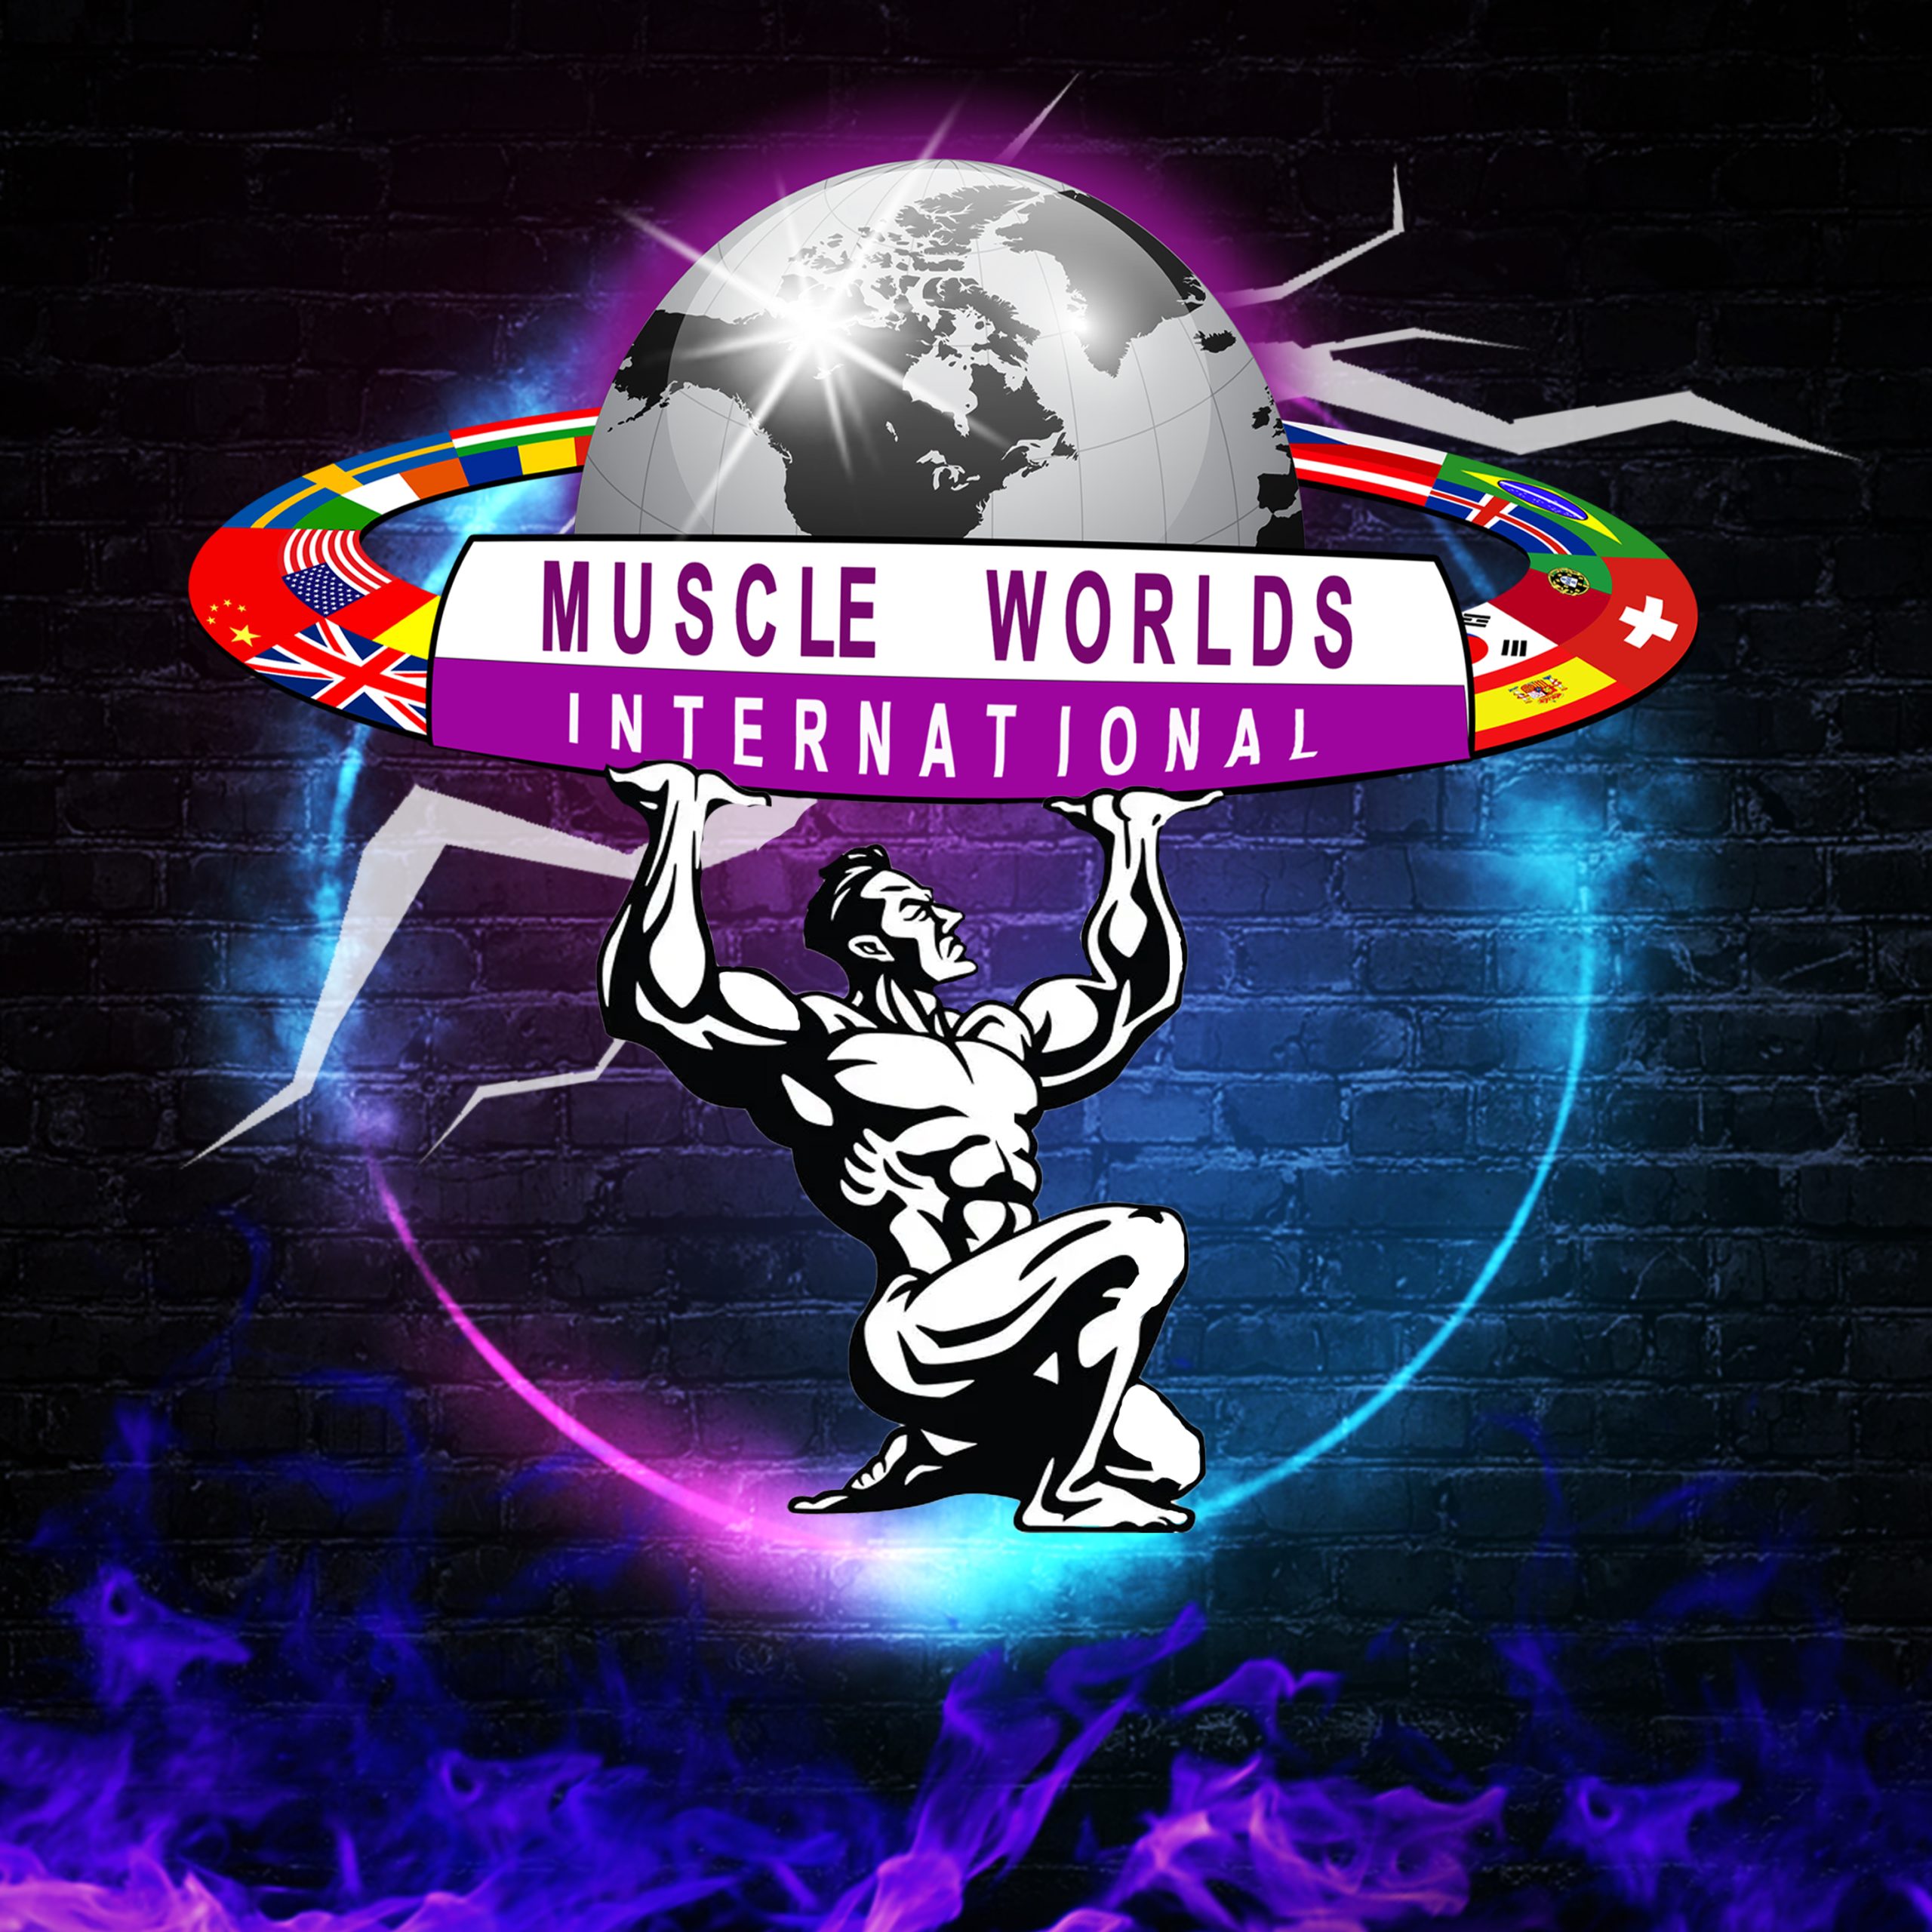 Muscles World